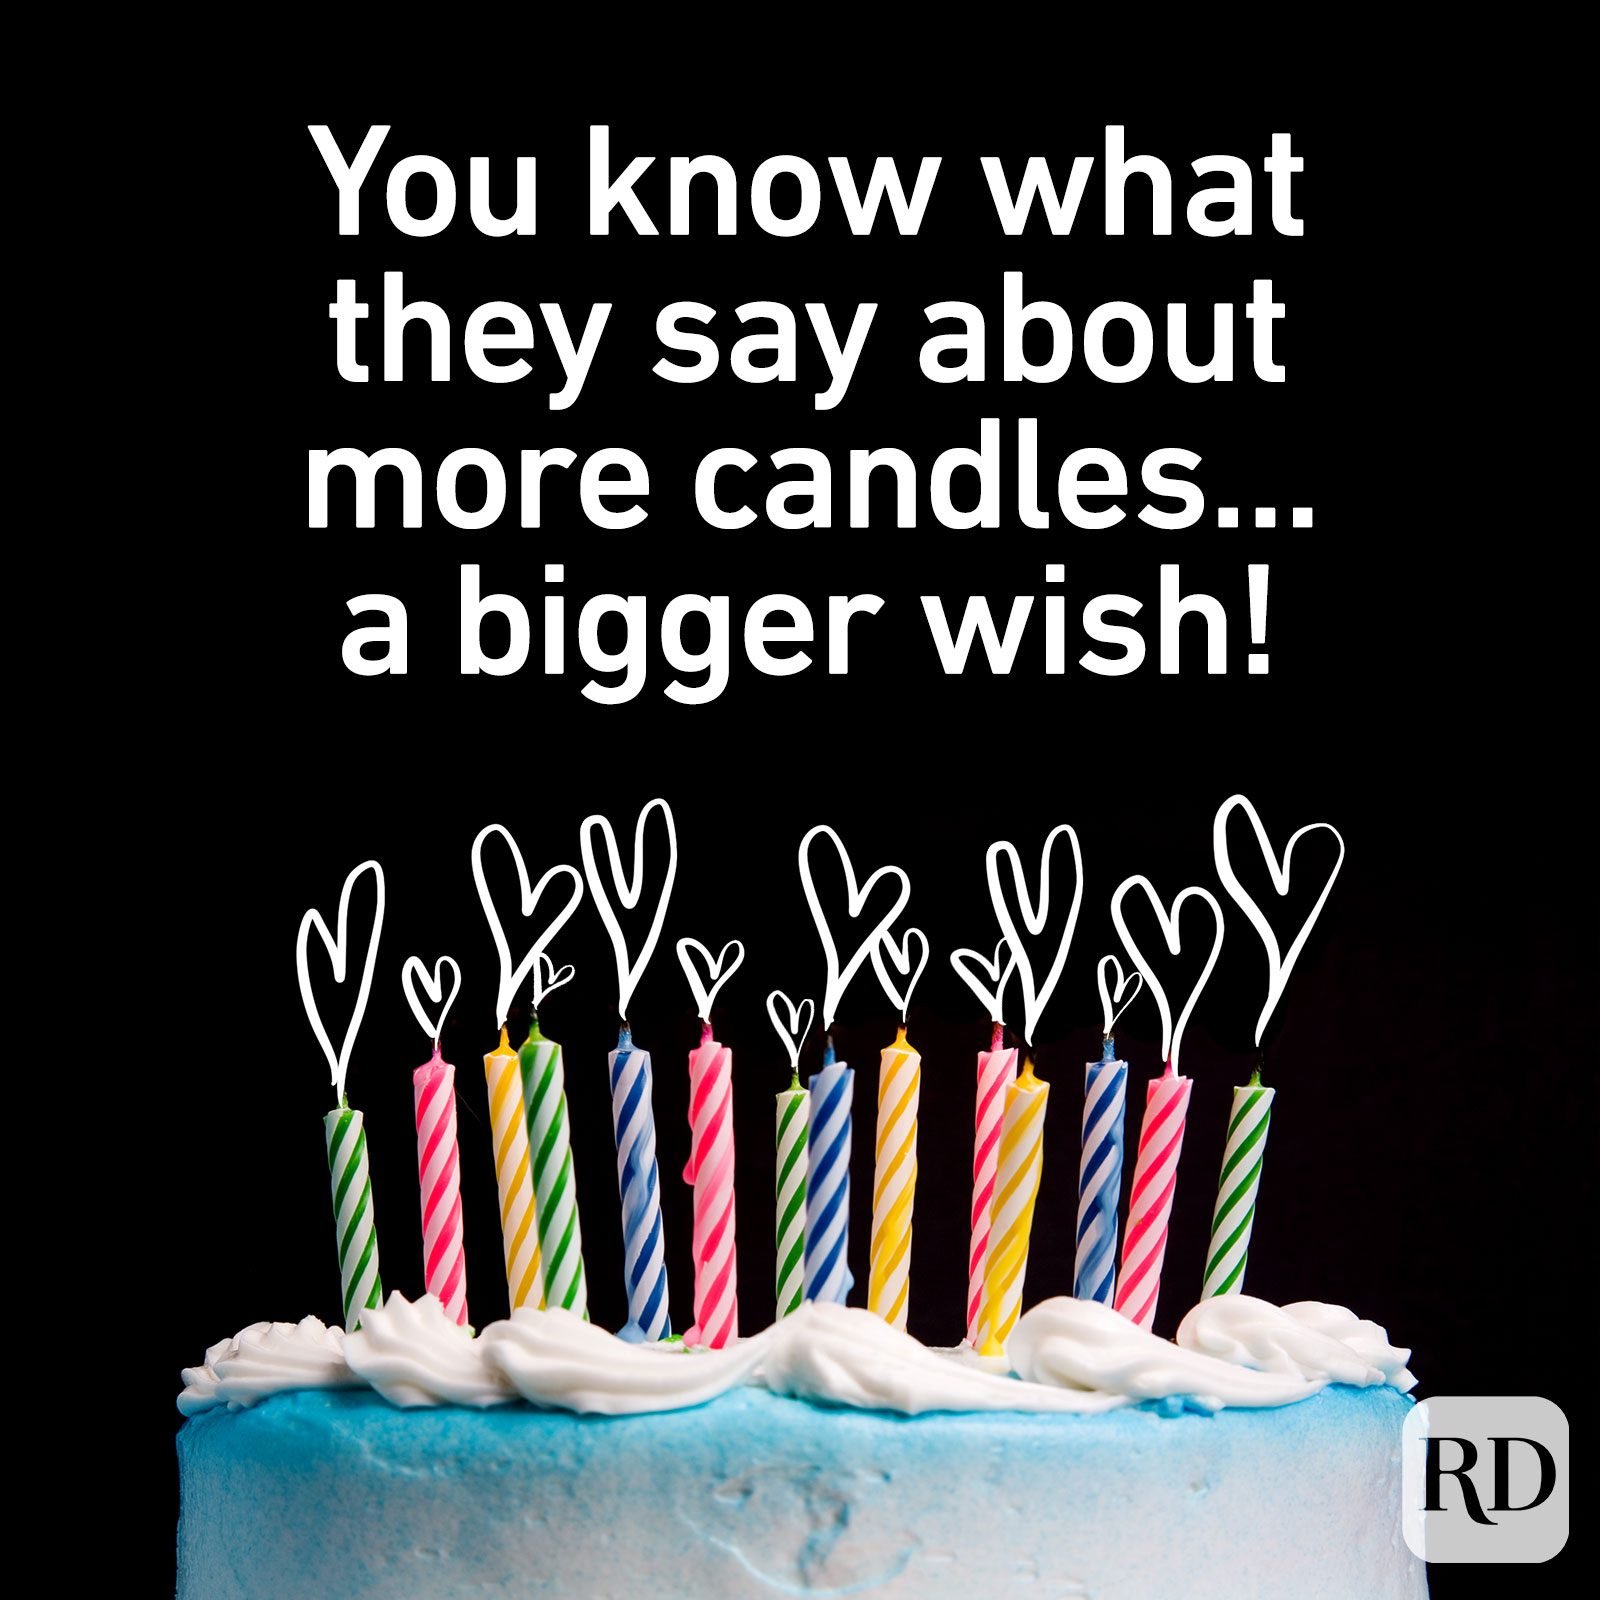 game of thrones birthday wishes